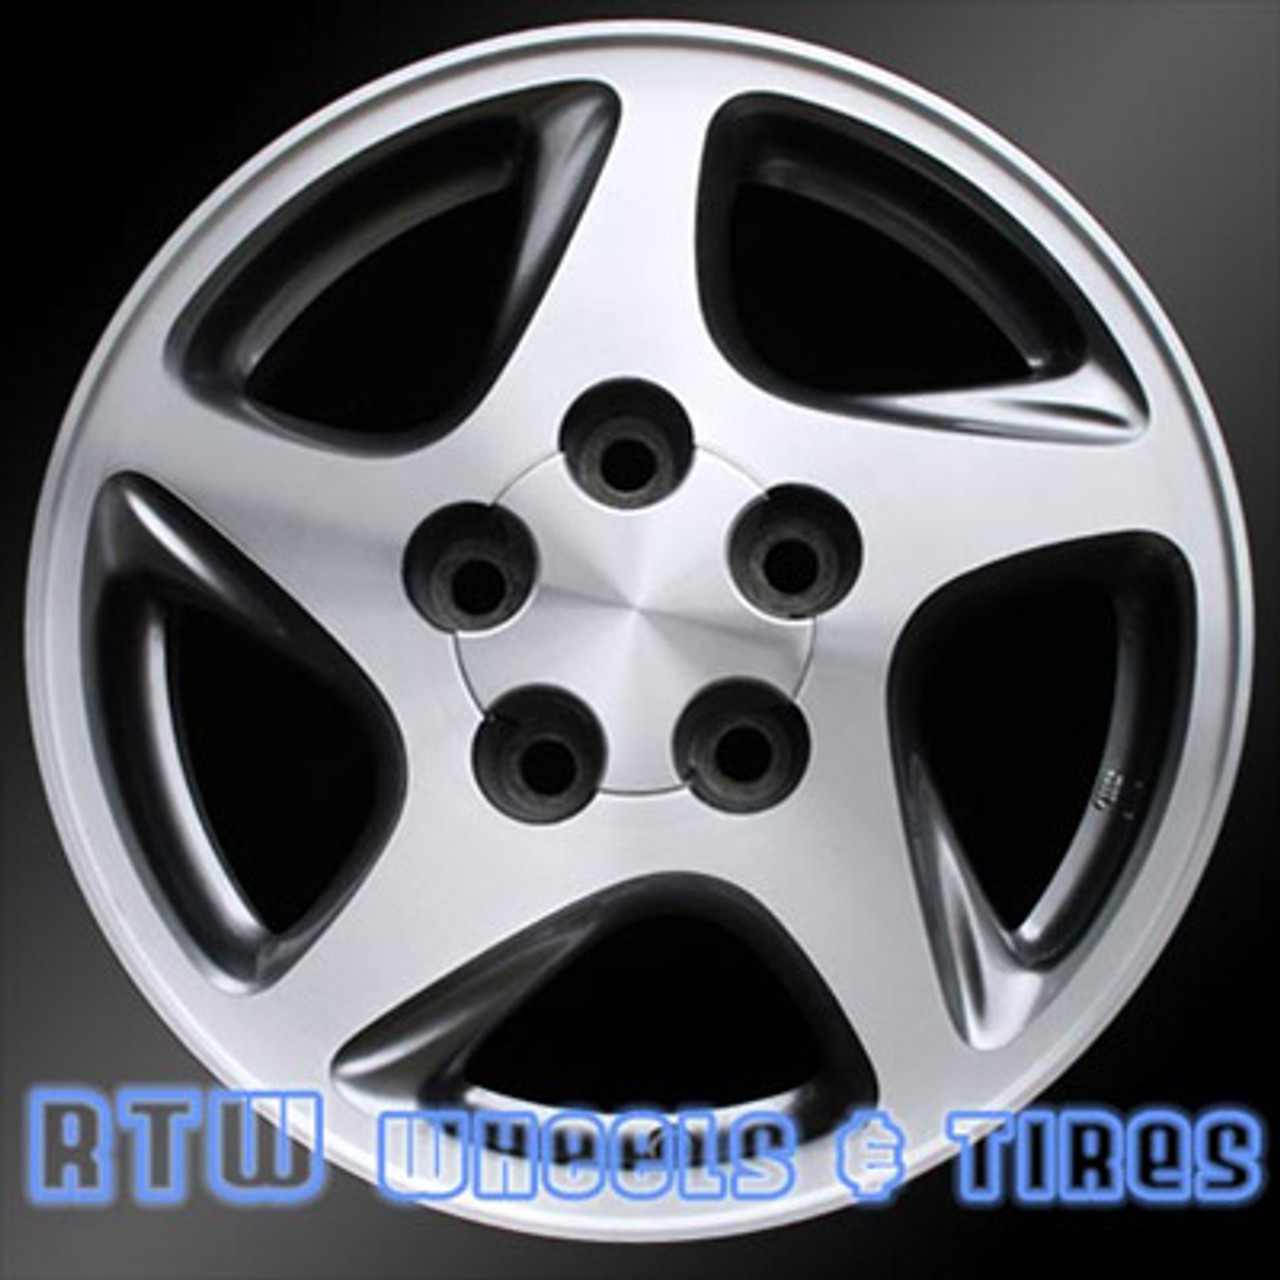 Toyota Avalon wheels for sale 1997-1999 Machined rims